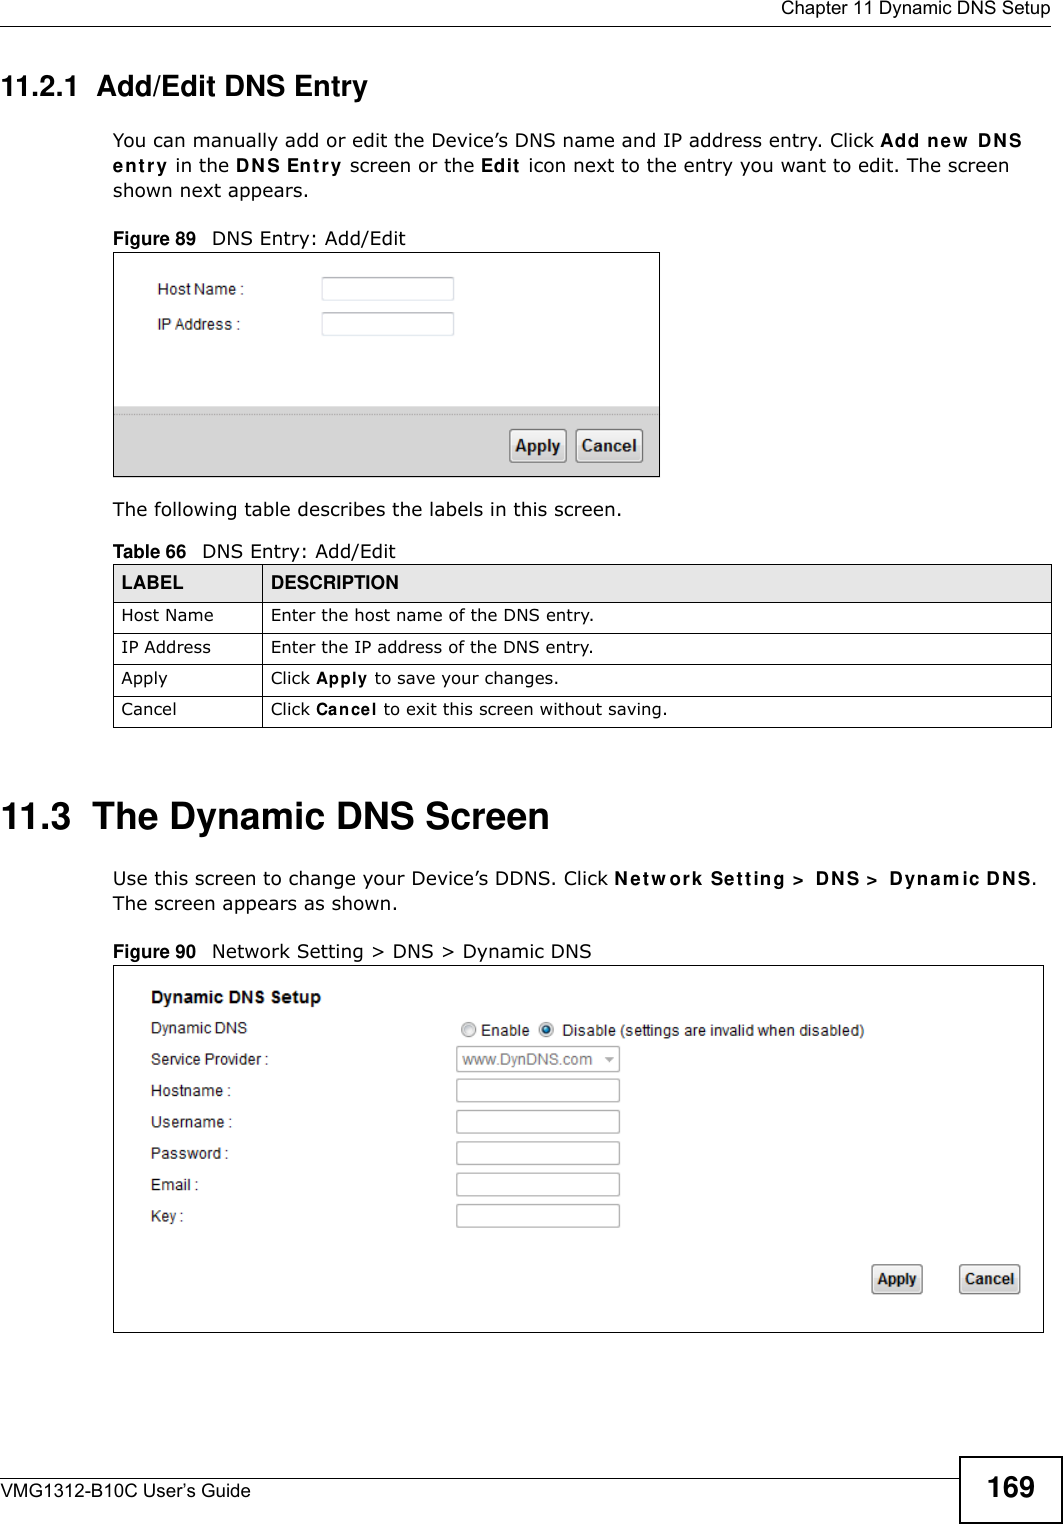  Chapter 11 Dynamic DNS SetupVMG1312-B10C User’s Guide 16911.2.1  Add/Edit DNS EntryYou can manually add or edit the Device’s DNS name and IP address entry. Click Add new  D N S e nt r y  in the DN S En t r y screen or the Ed it  icon next to the entry you want to edit. The screen shown next appears.Figure 89   DNS Entry: Add/EditThe following table describes the labels in this screen. 11.3  The Dynamic DNS ScreenUse this screen to change your Device’s DDNS. Click Net w ork Se t t ing &gt;  DN S &gt;  Dynam ic D N S. The screen appears as shown.Figure 90   Network Setting &gt; DNS &gt; Dynamic DNSTable 66   DNS Entry: Add/EditLABEL DESCRIPTIONHost Name Enter the host name of the DNS entry.IP Address Enter the IP address of the DNS entry.Apply Click Apply to save your changes.Cancel Click Cancel to exit this screen without saving.